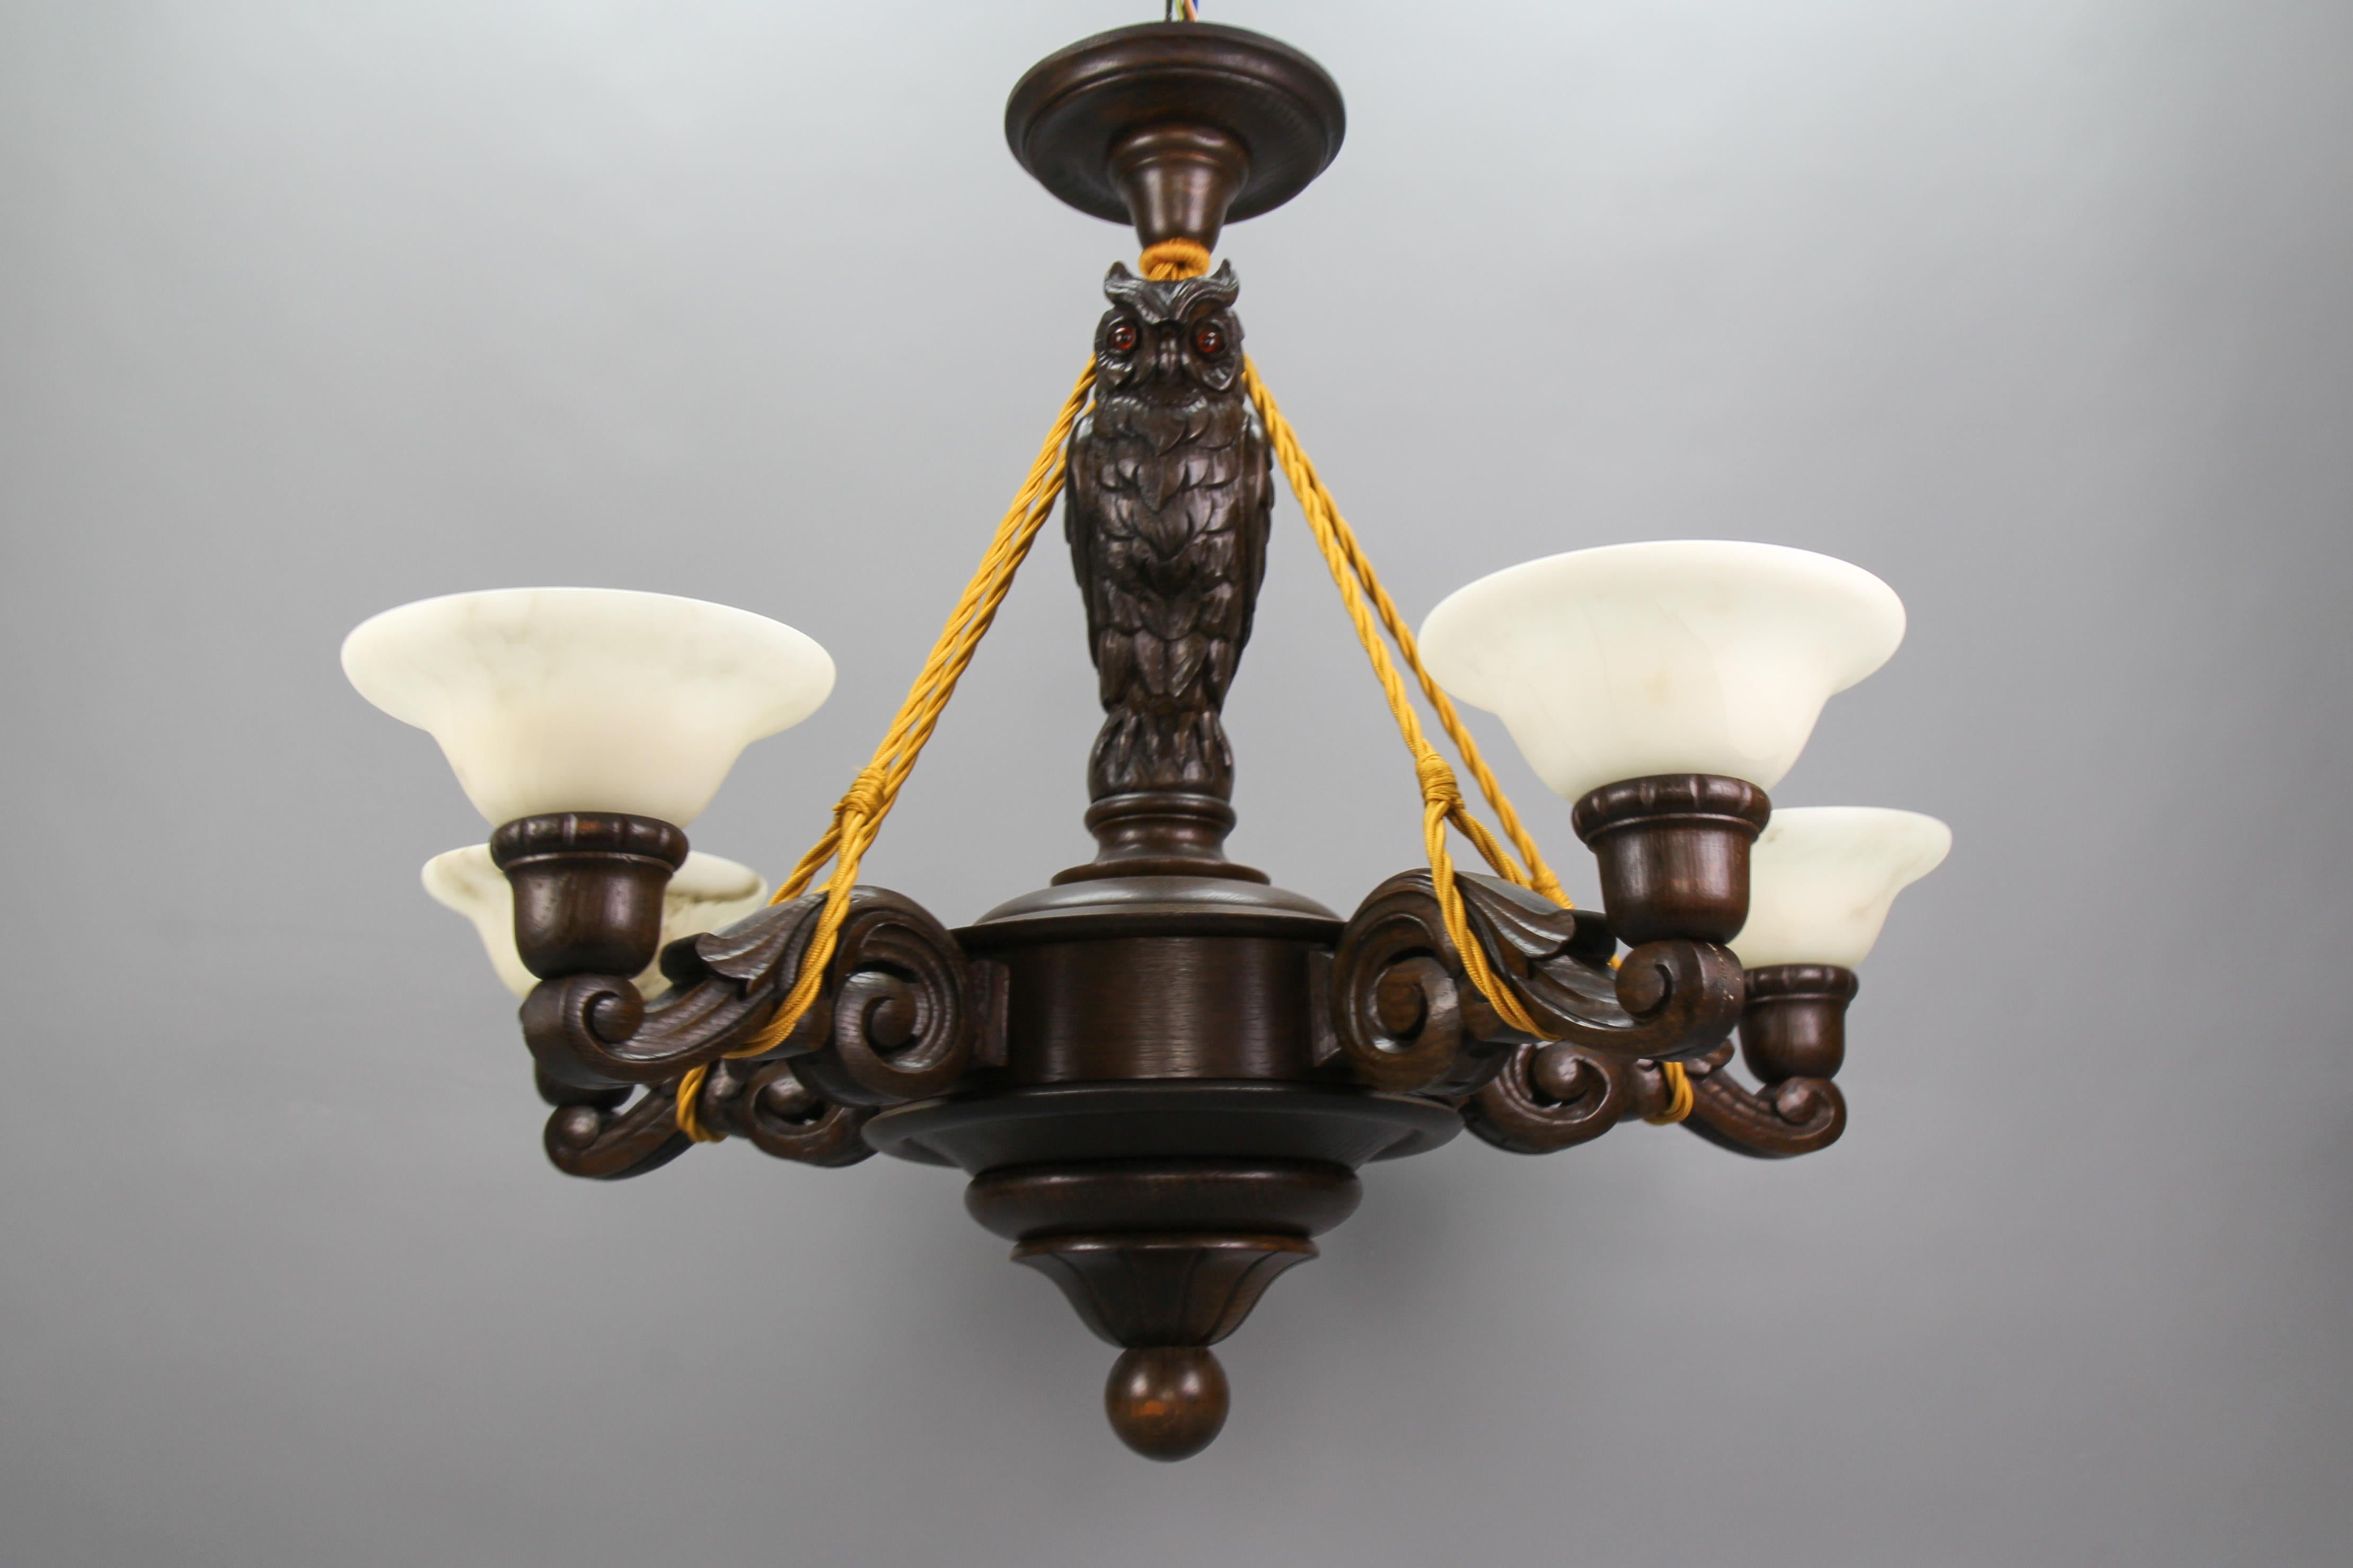 Beautiful and impressive five-light oakwood chandelier with an owl figure, Germany, the 1930s. This hand-carved chandelier features five arms, each with a white alabaster lampshade, hung on five ropes/wires and connected to a wooden ceiling canopy.